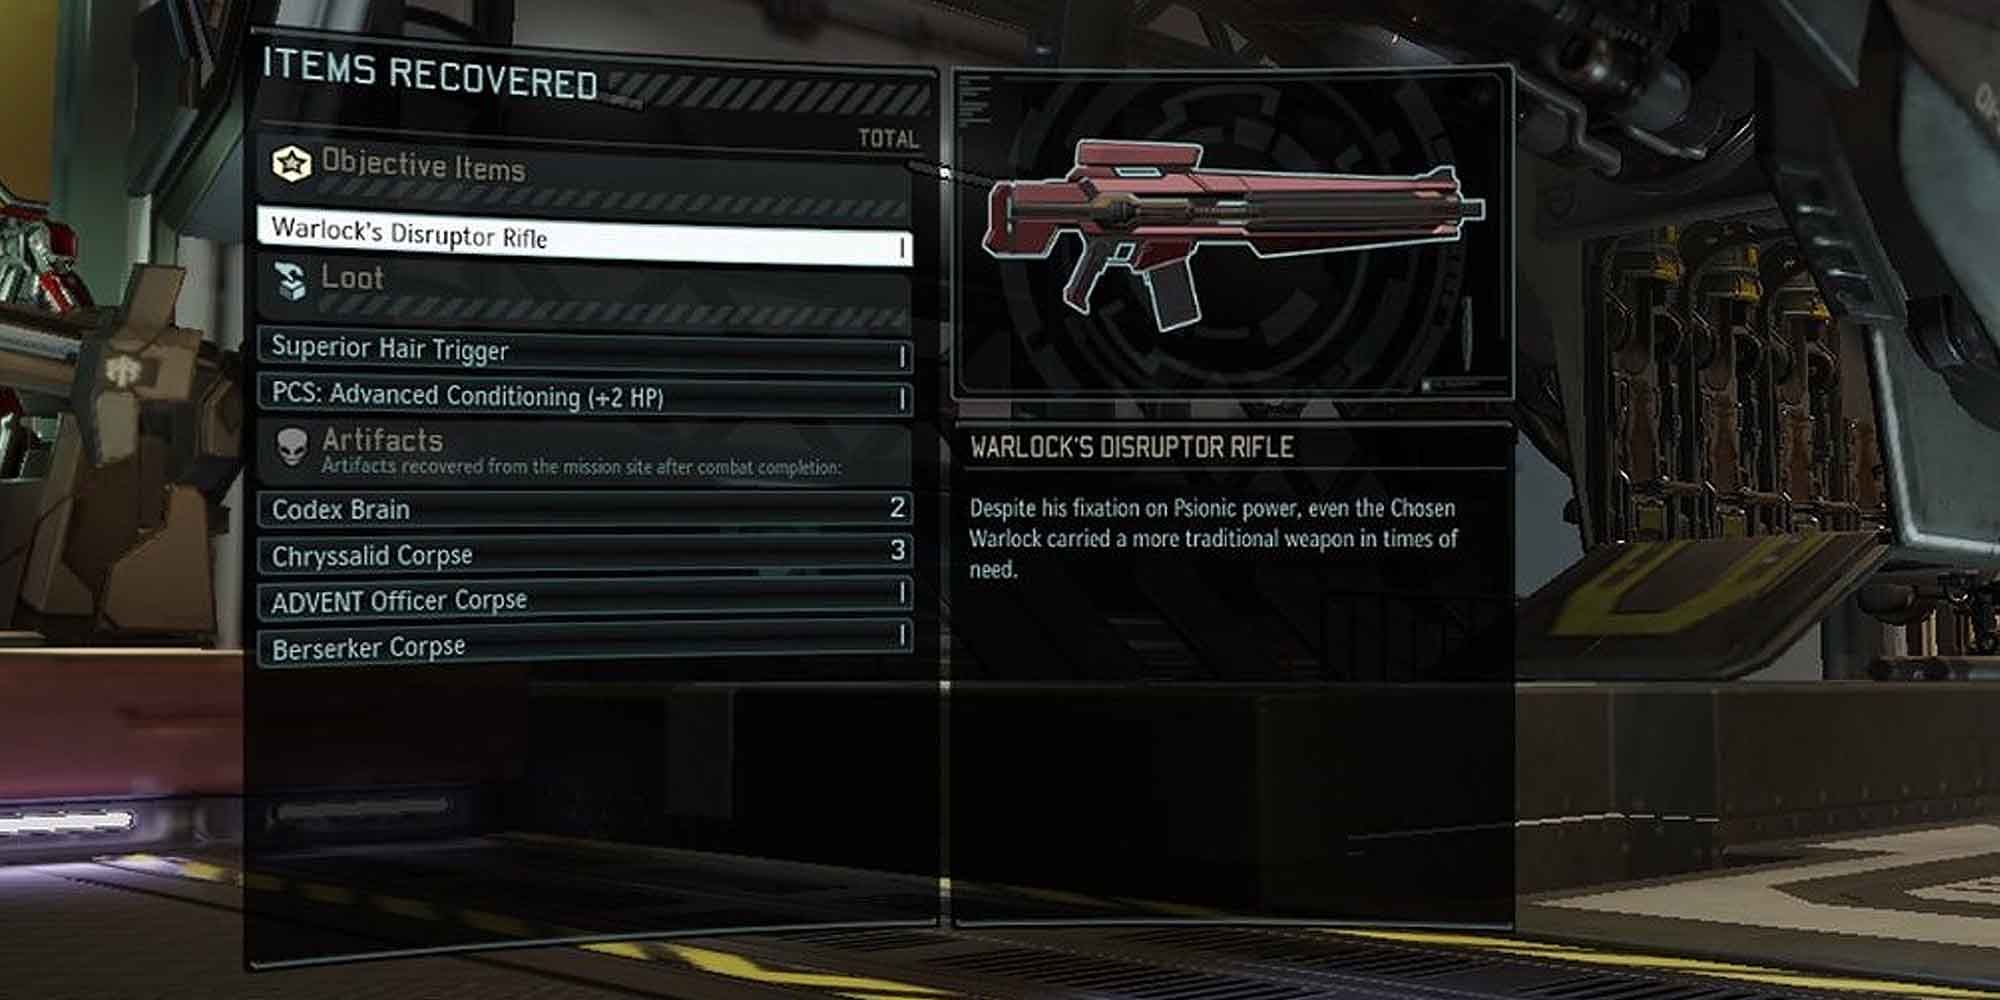 The information screen after finding the Disruptor Rifle in Xcom 2